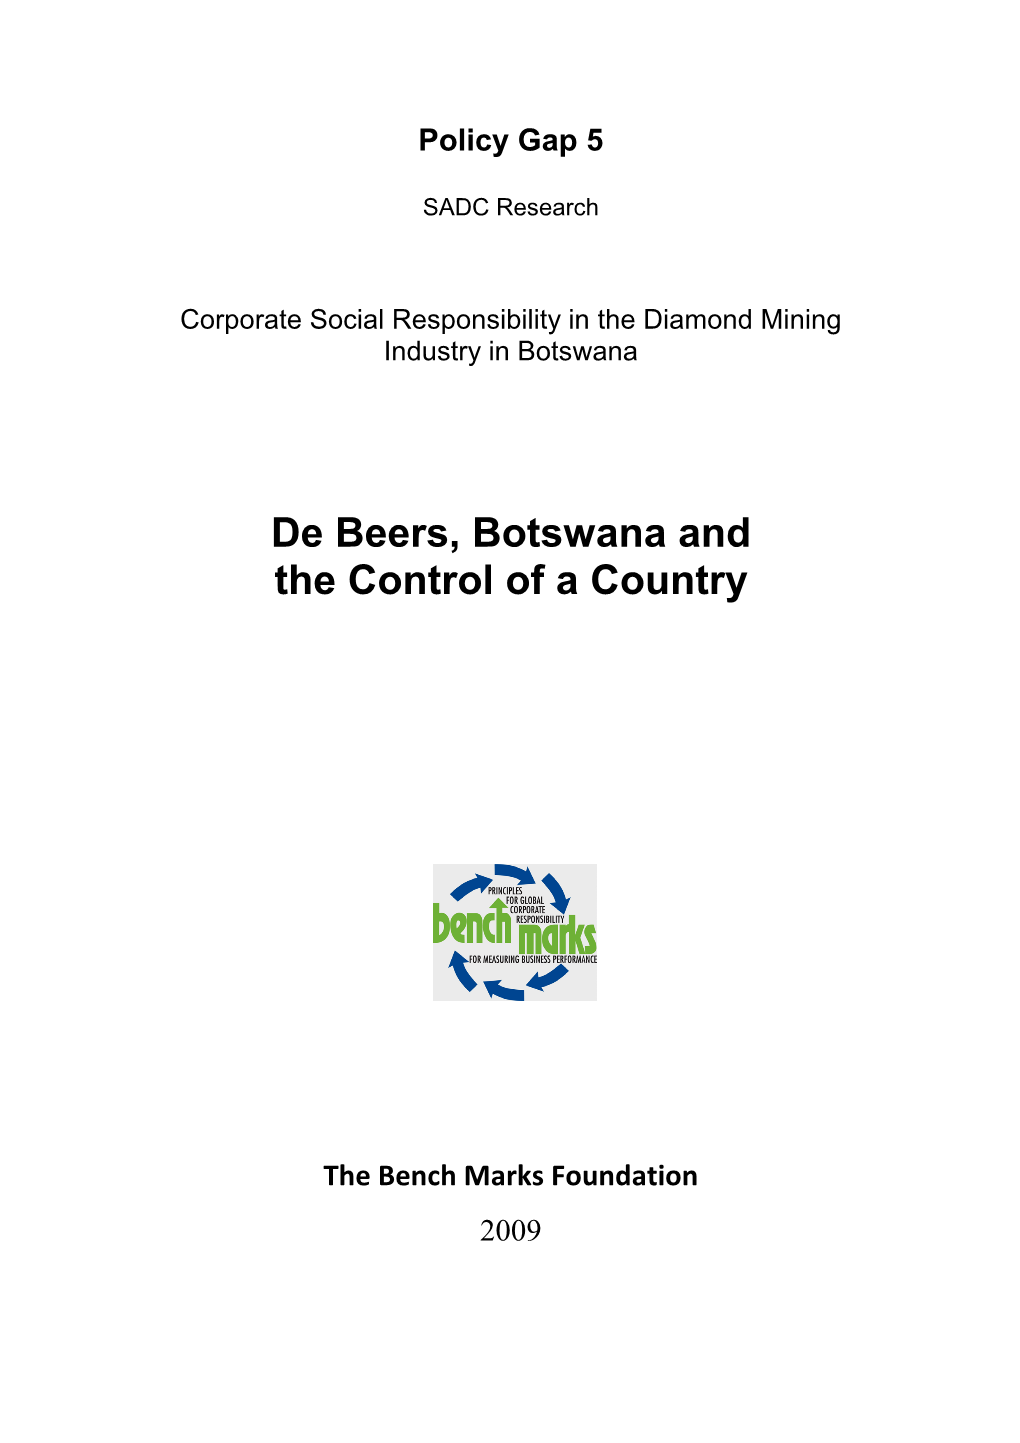 De Beers, Botswana and the Control of a Country